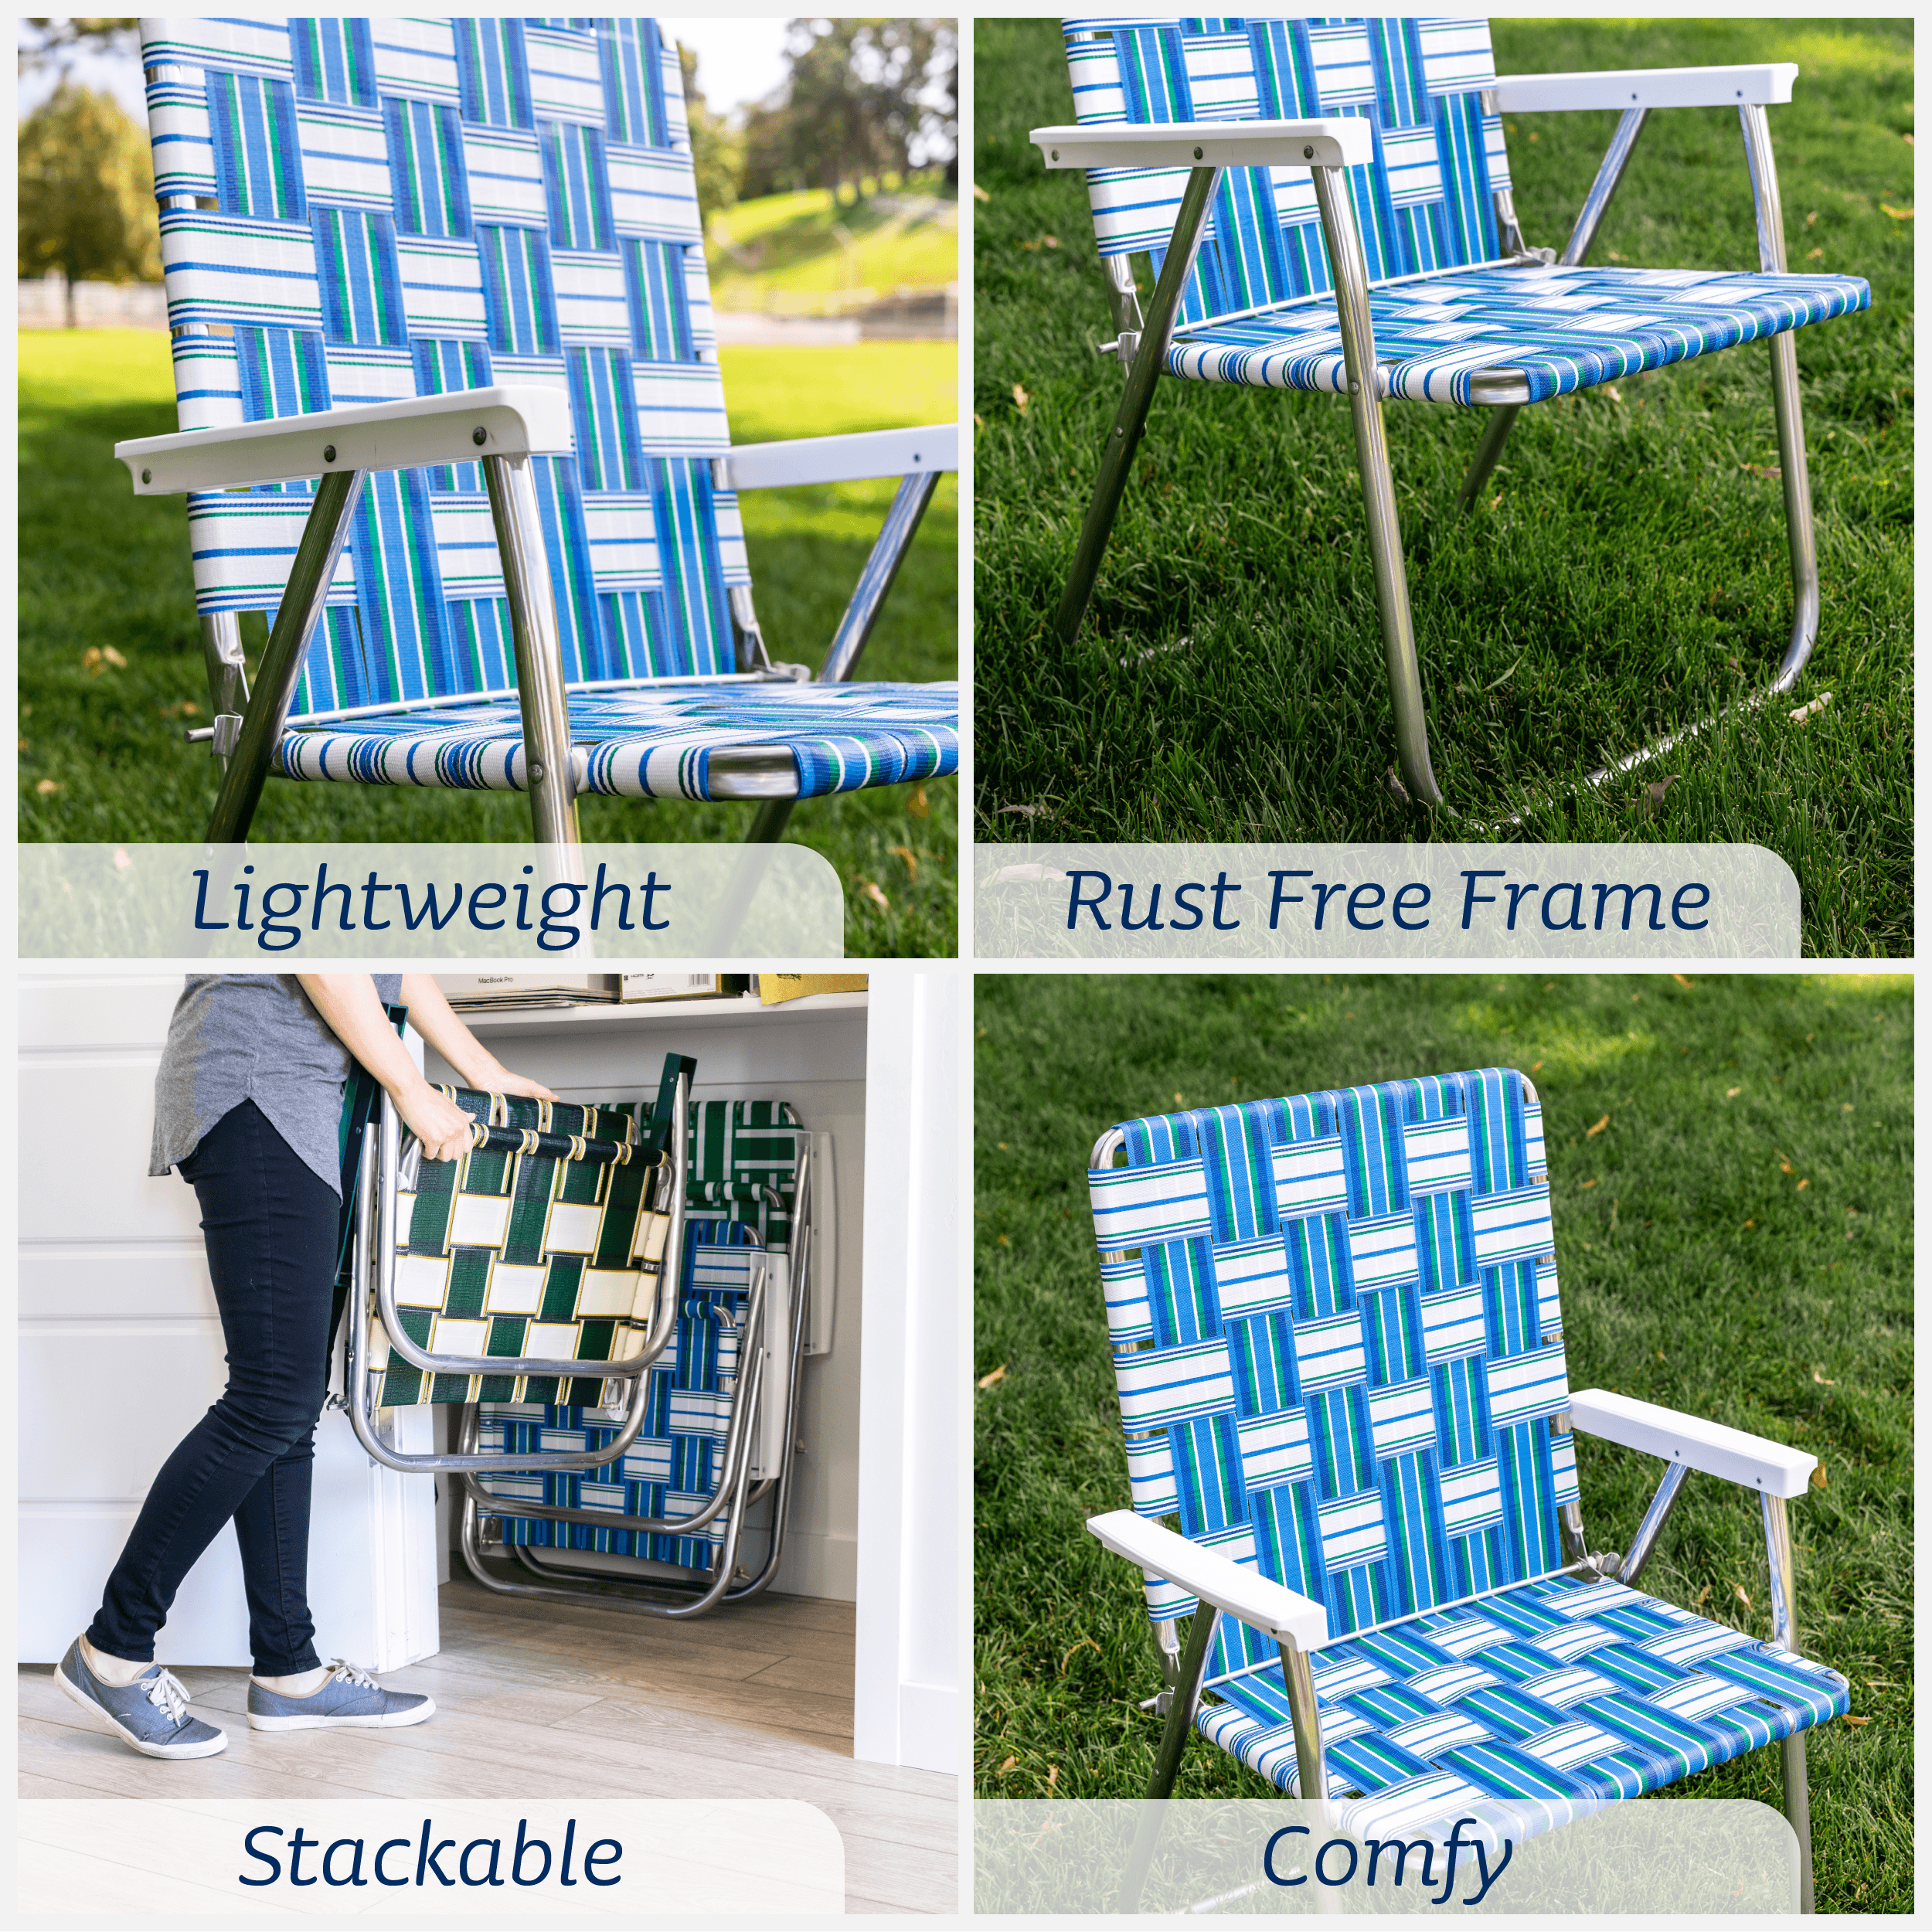 Lawn Chair USA Classic Folding Aluminum Webbed Chair | Blue/ White with White Arms - image 5 of 7